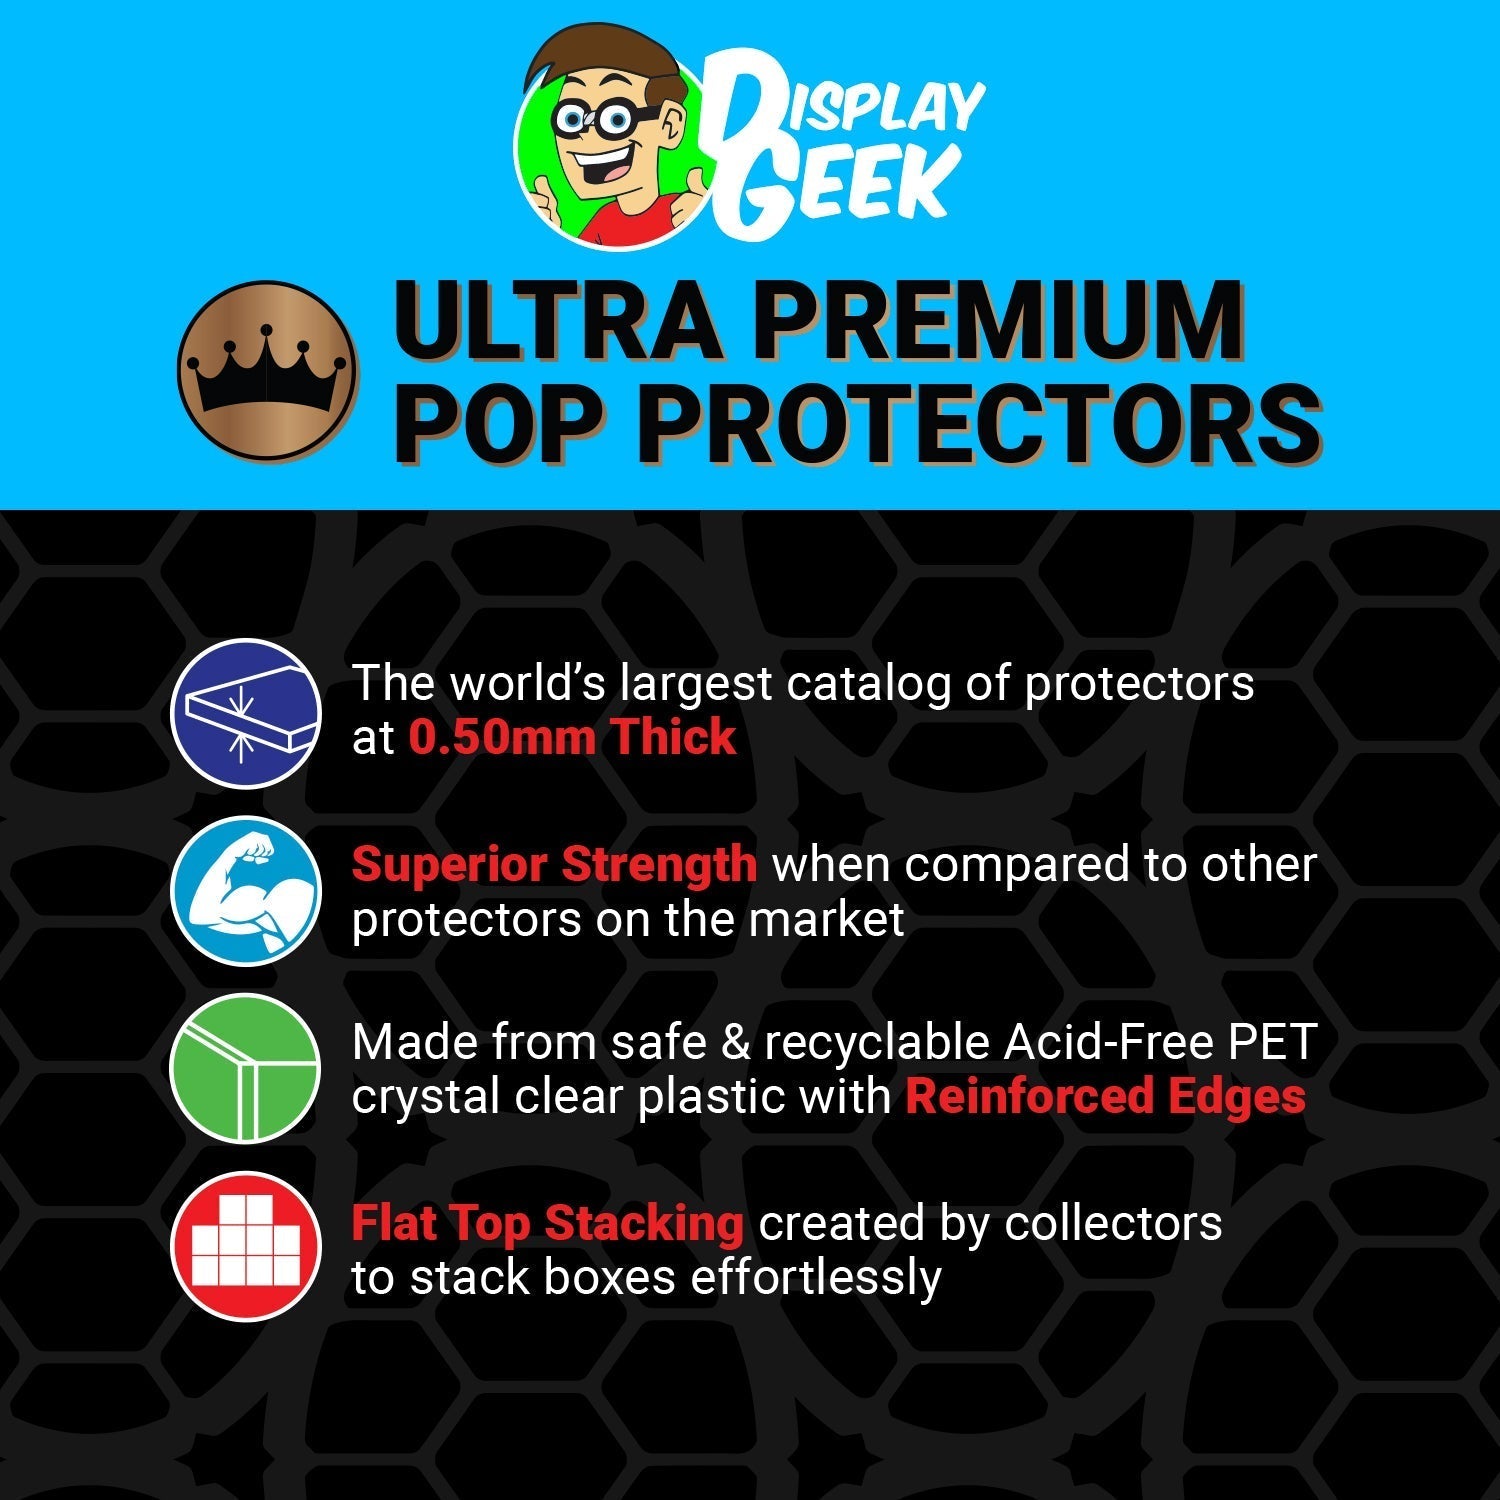 Pop Protector for 9 inch Giant Steamboat Willie Metallic D23 Expo Funko Pop - PPG Pop Protector Guide Search Created by Display Geek